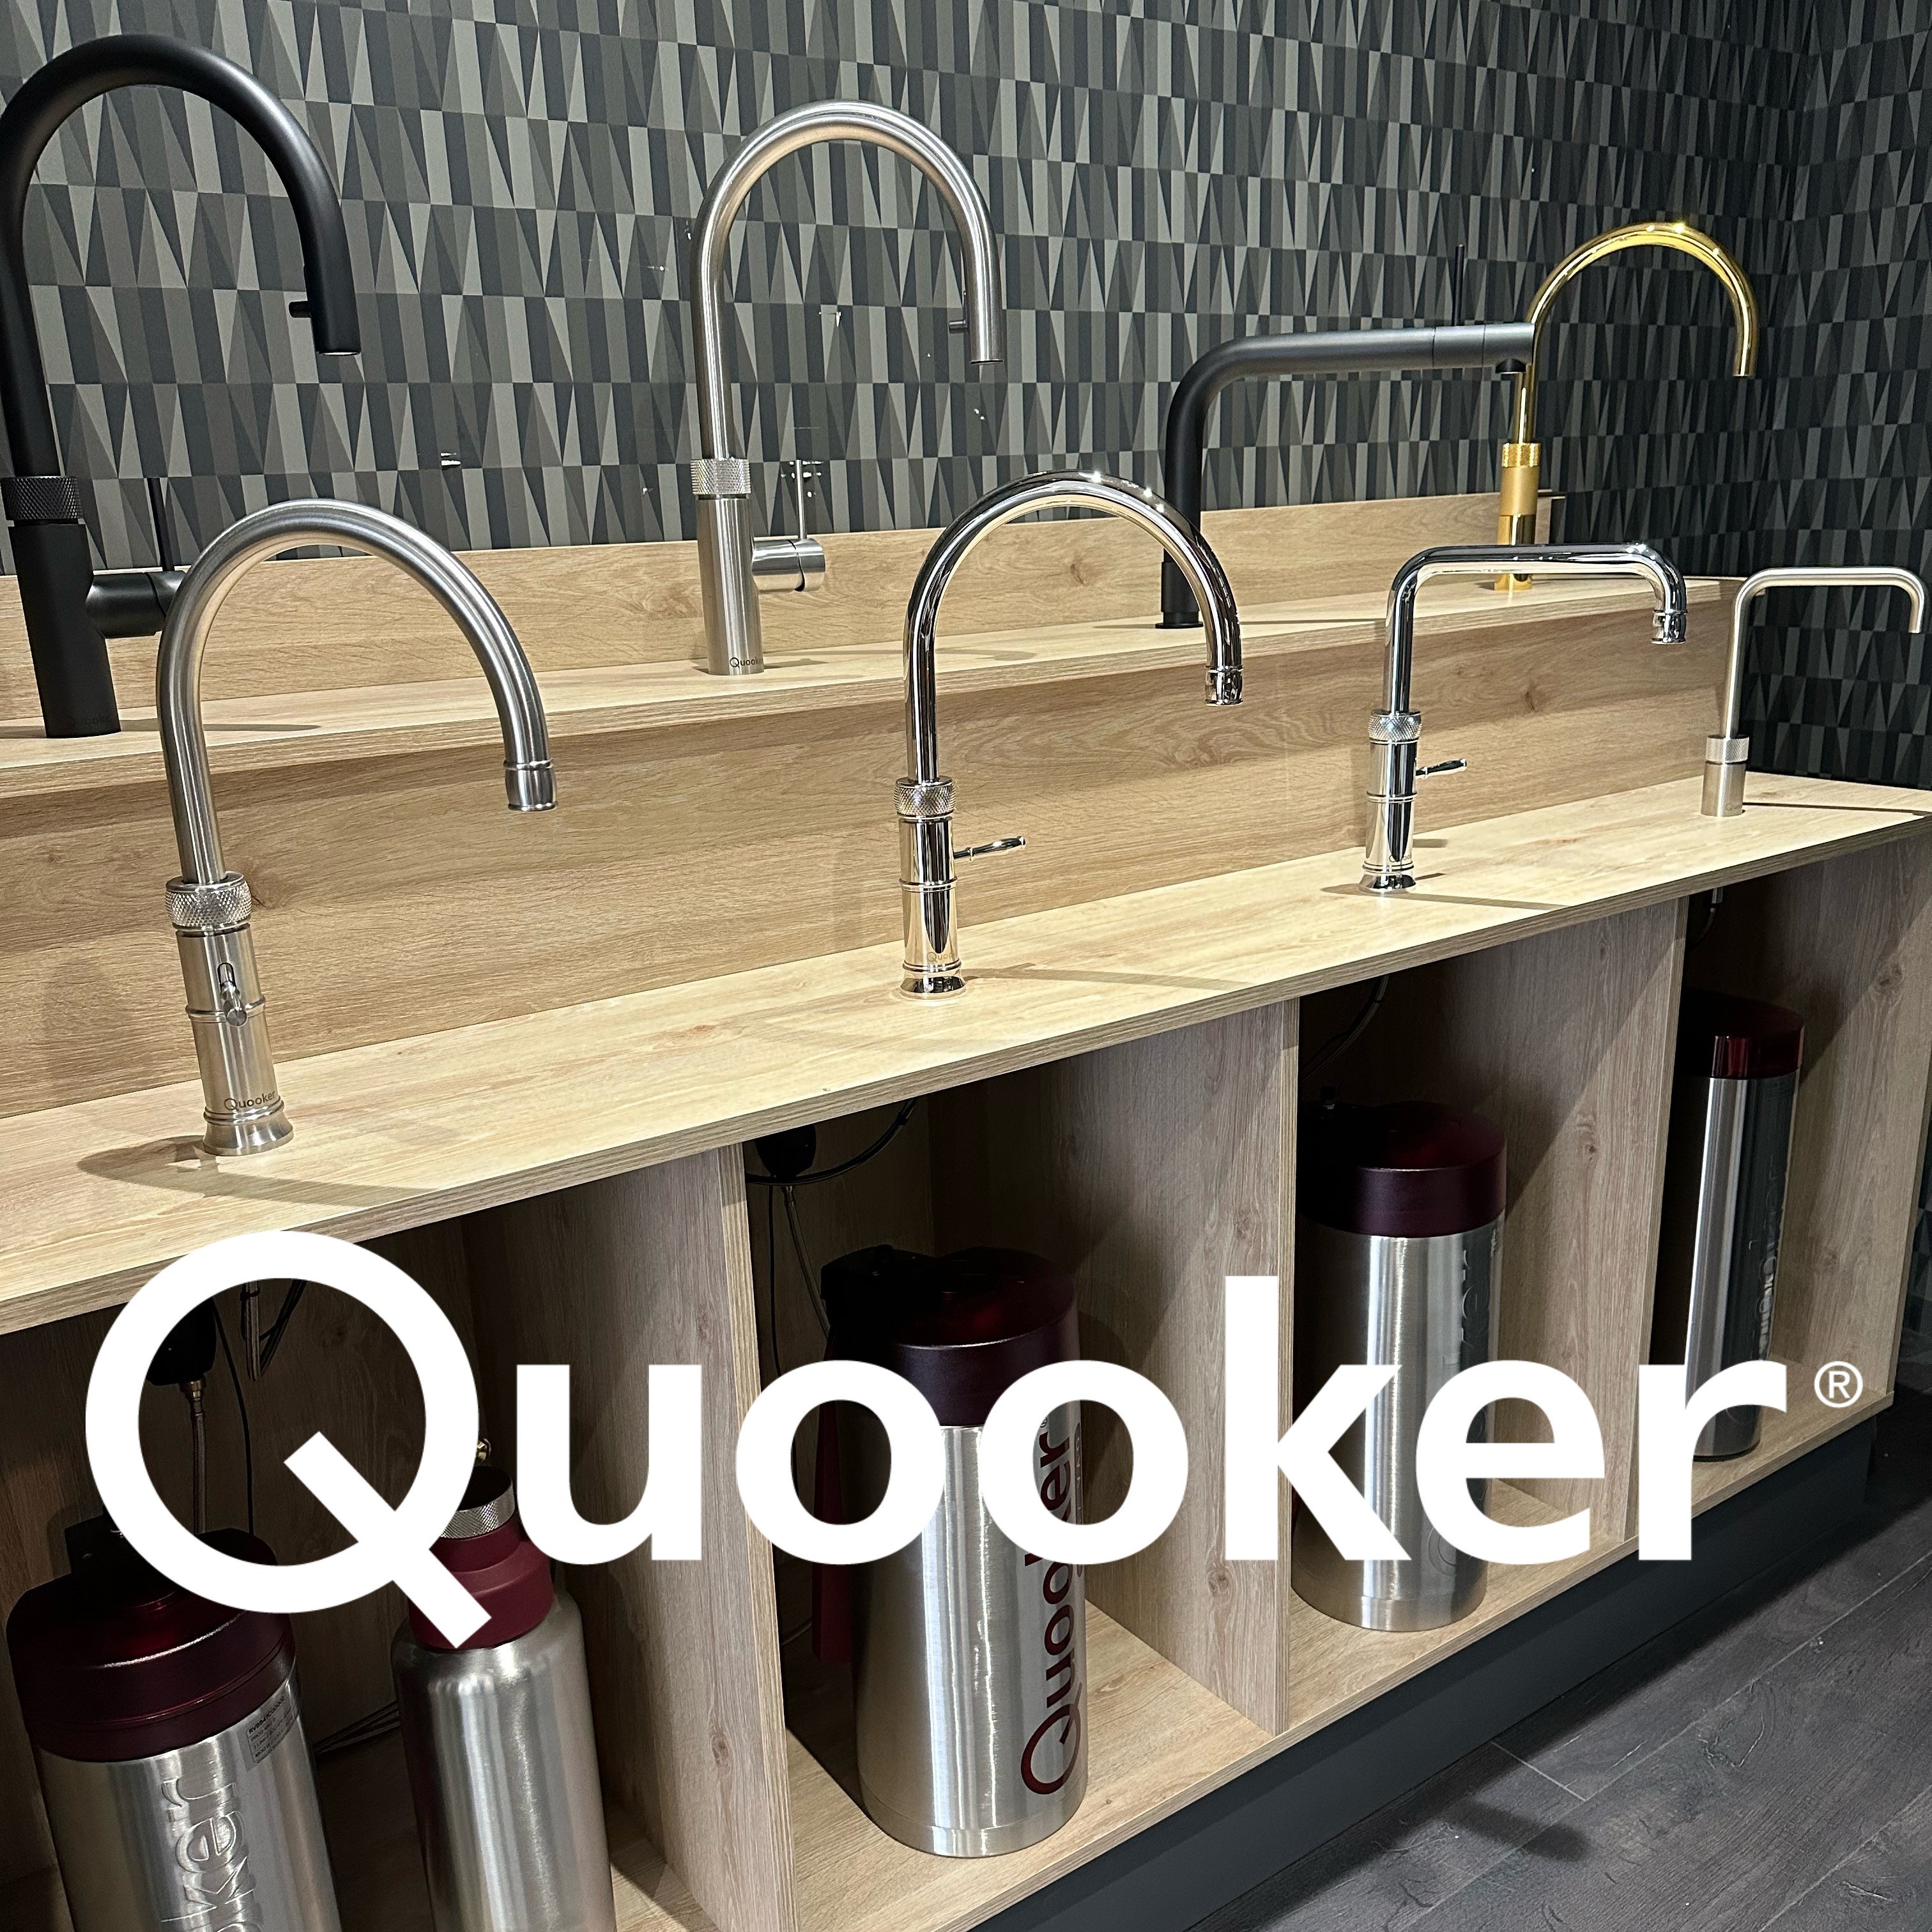 /images/products/AllQuooker/AllQuooker.jpg